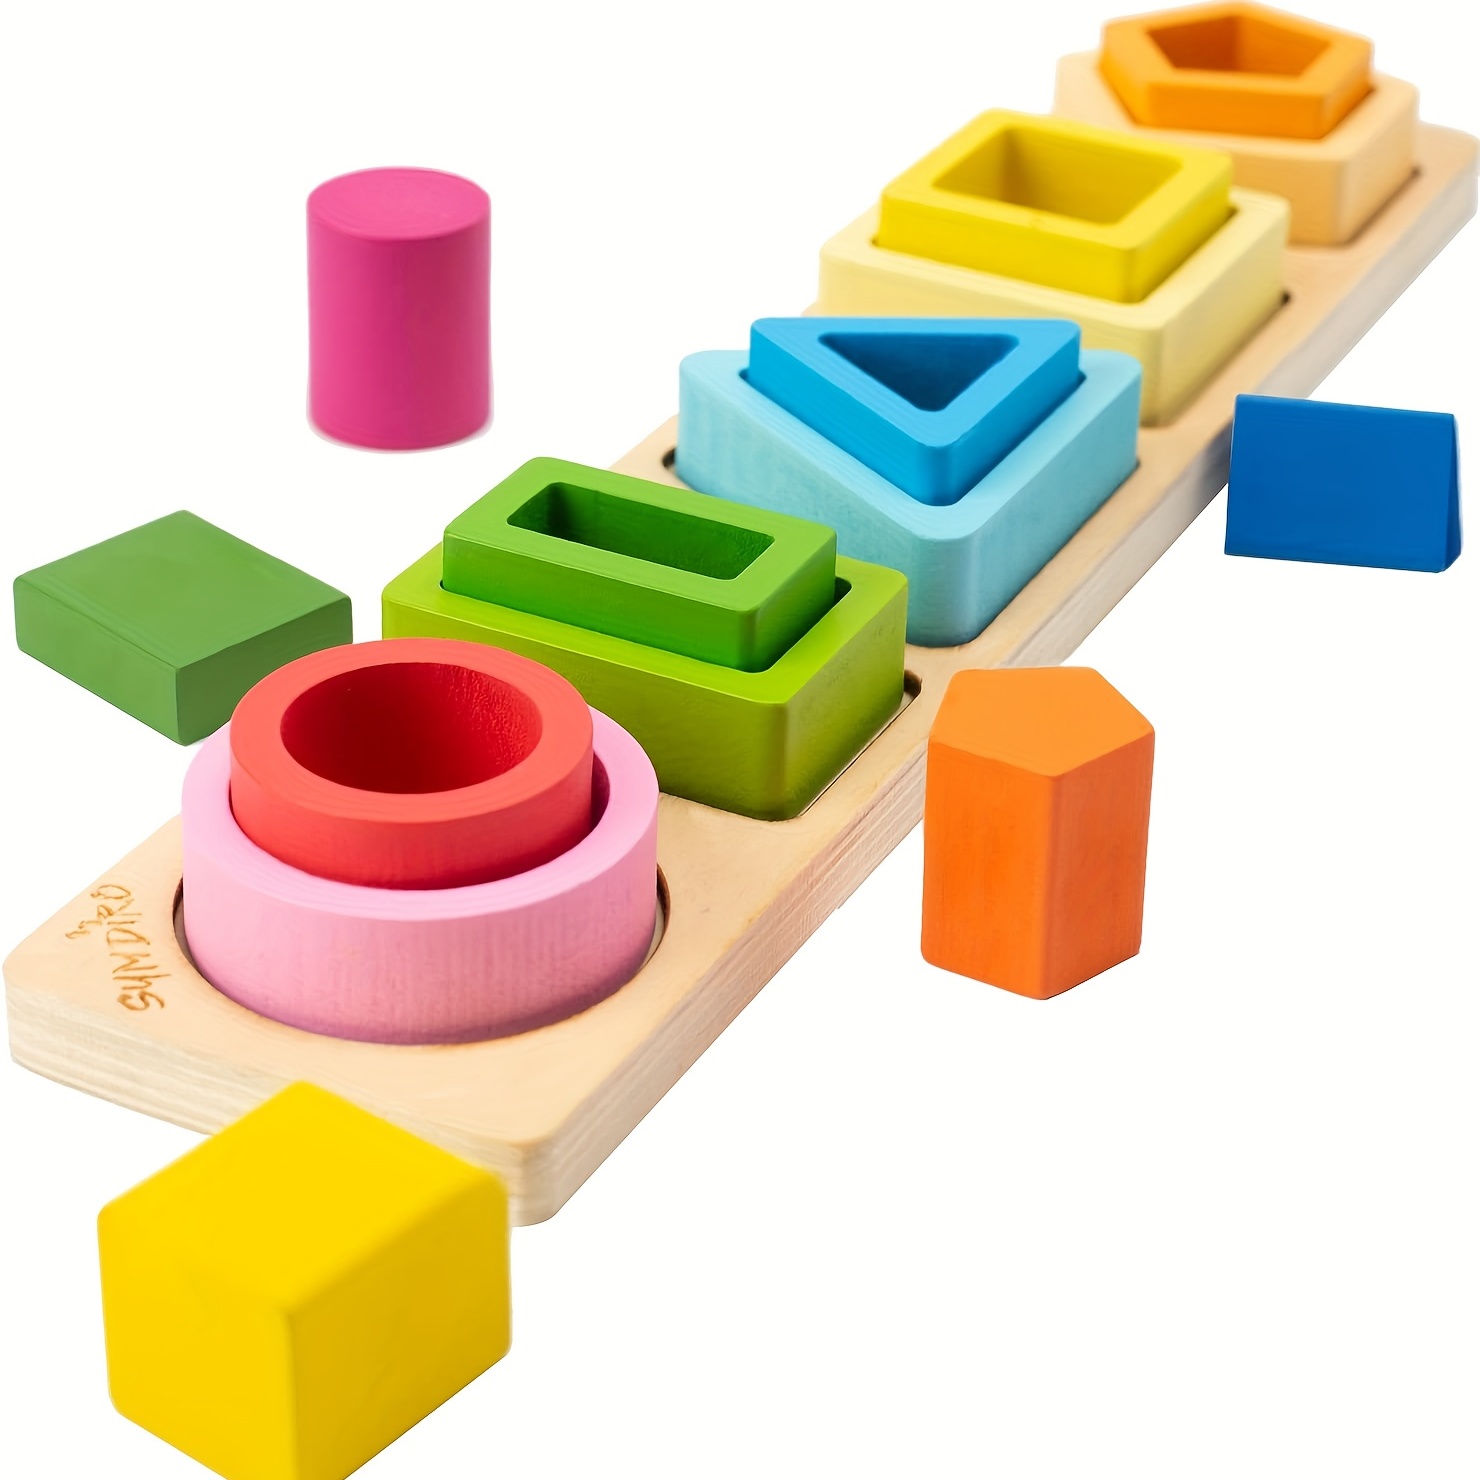 

Montessori Toys Suitable For Boys And Girls, Wooden Sorting And Stacking Toys Toddler Baby Color Recognition Shape Sorting Gift Education Learning Toy, Christmas/halloween/thanksgiving Gift